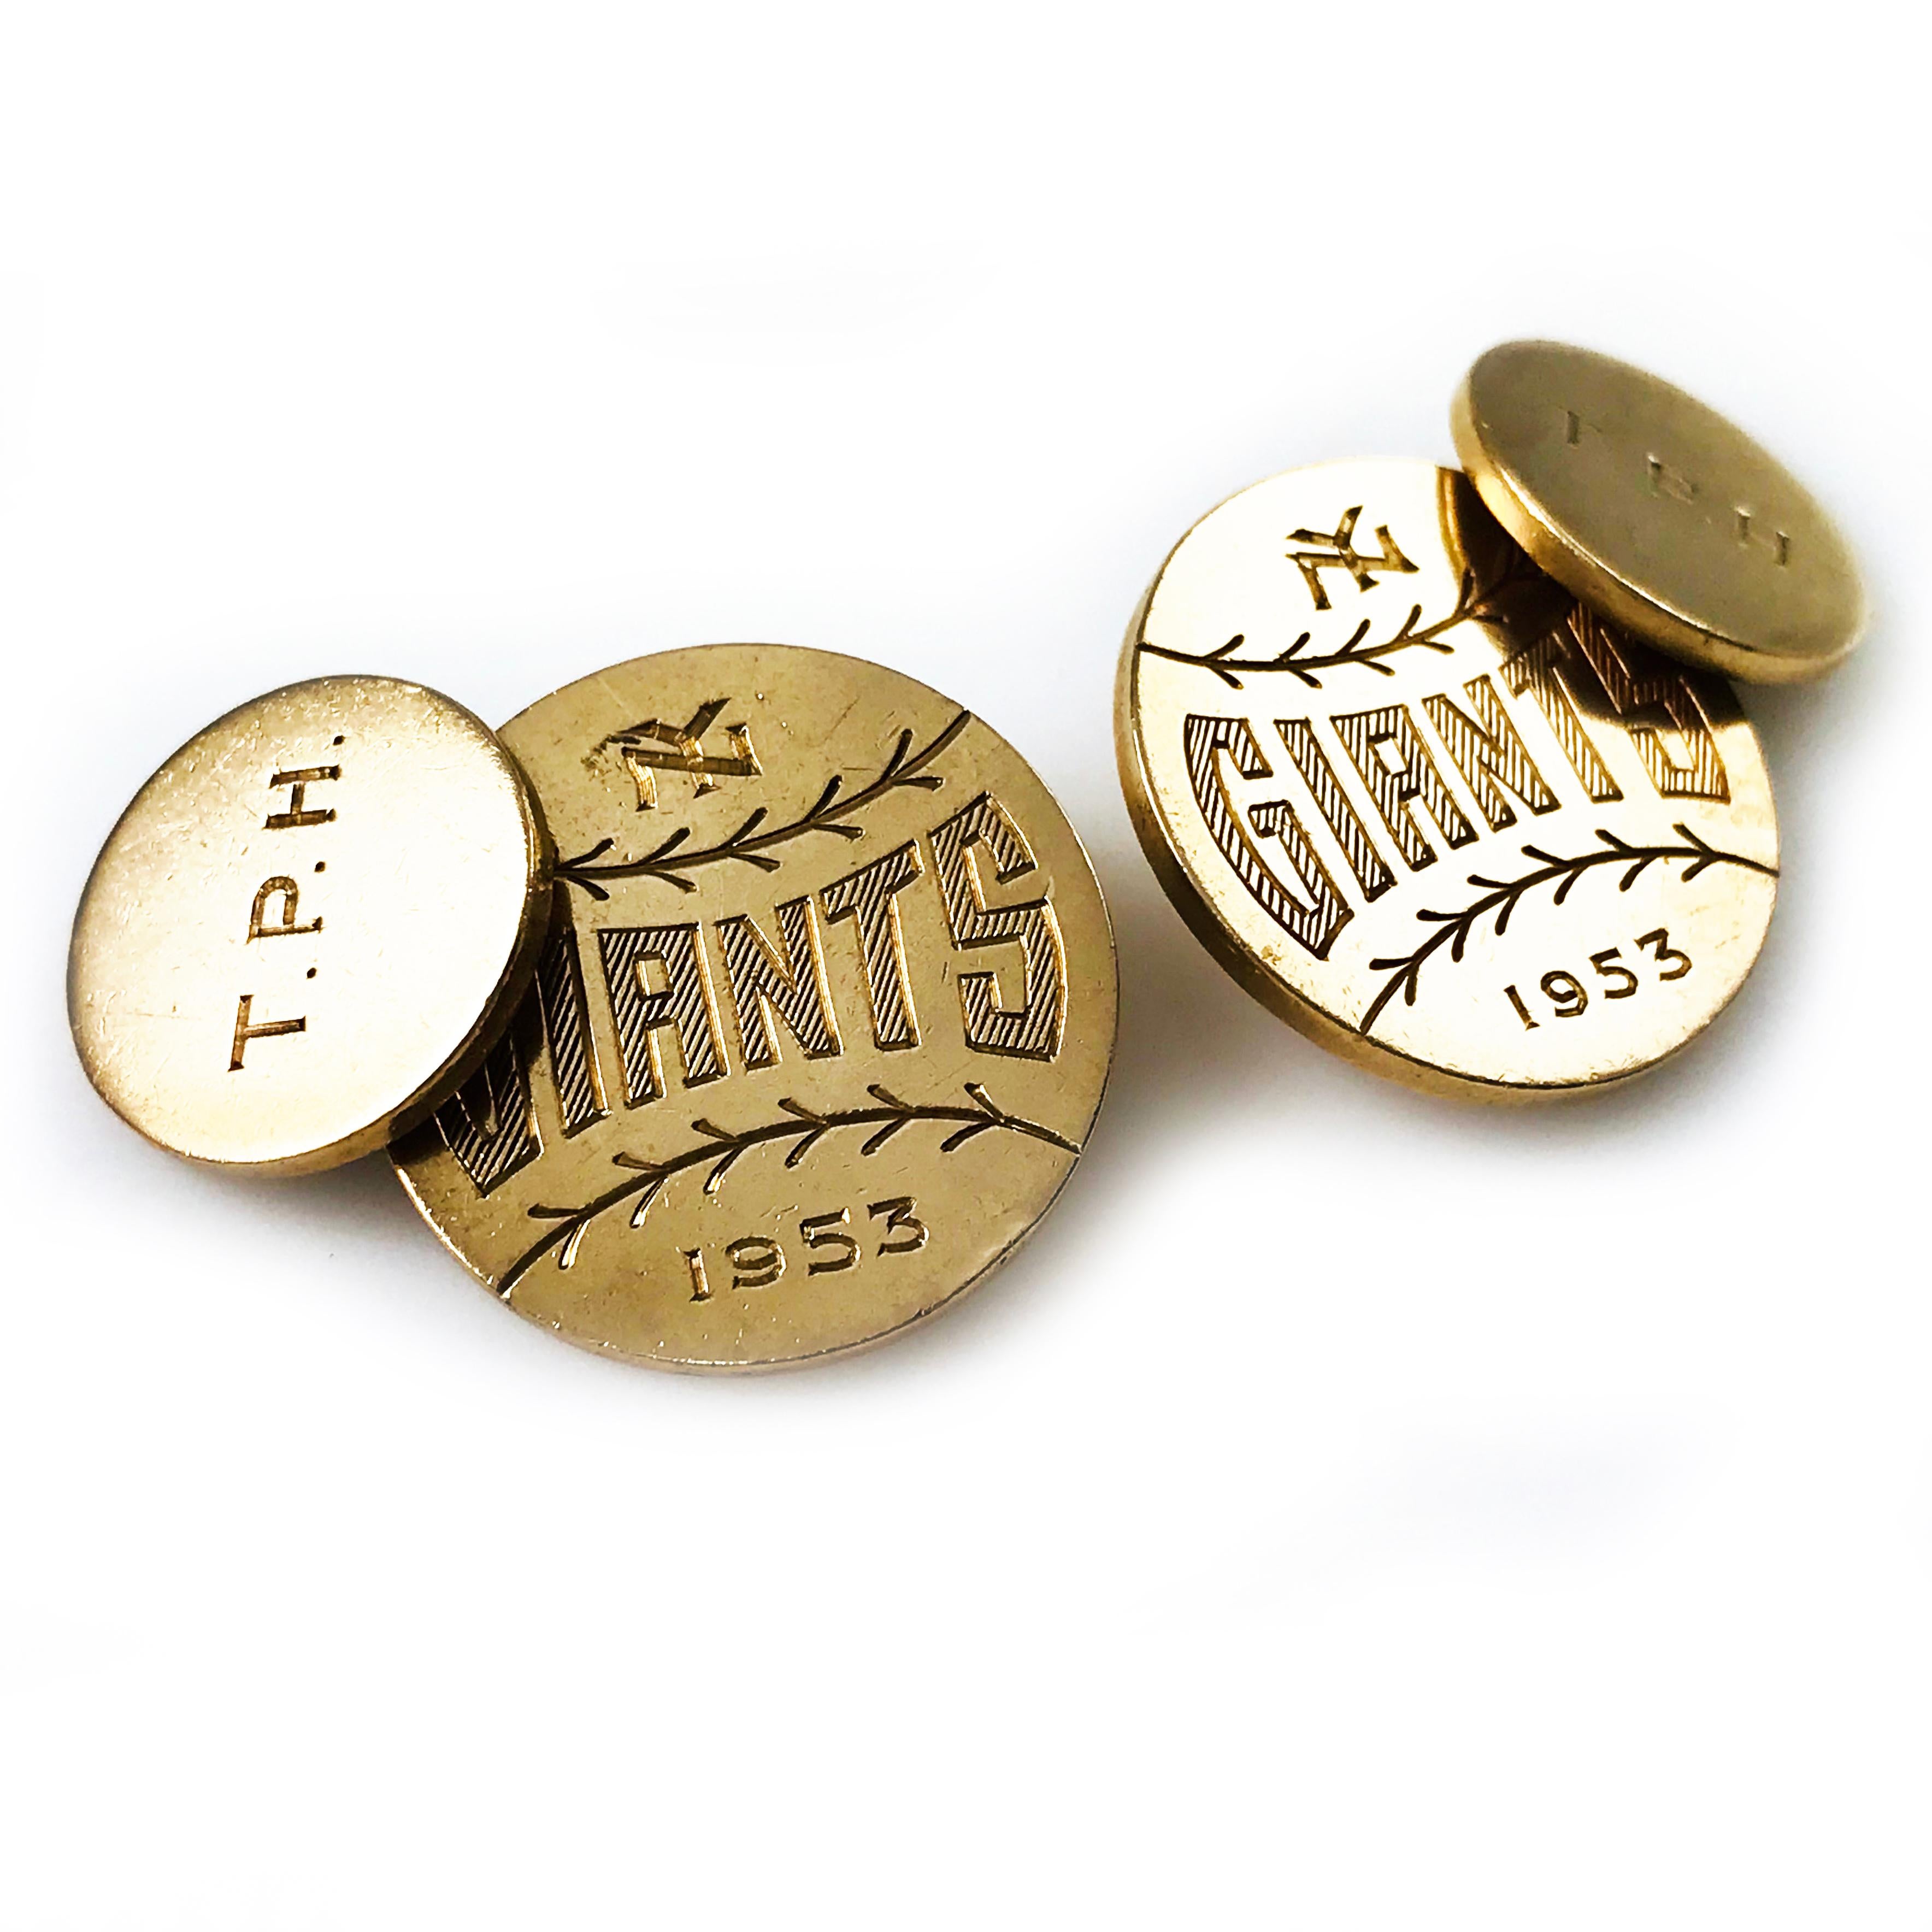 Vintage 14k Gold NY Giants Cufflinks, 1953. Own a piece of sports history with these round 14k gold hand engraved New York Giants cufflinks. 
These fantastic cufflinks were owned and worn by baseball ambassador, Tsuneo P. 